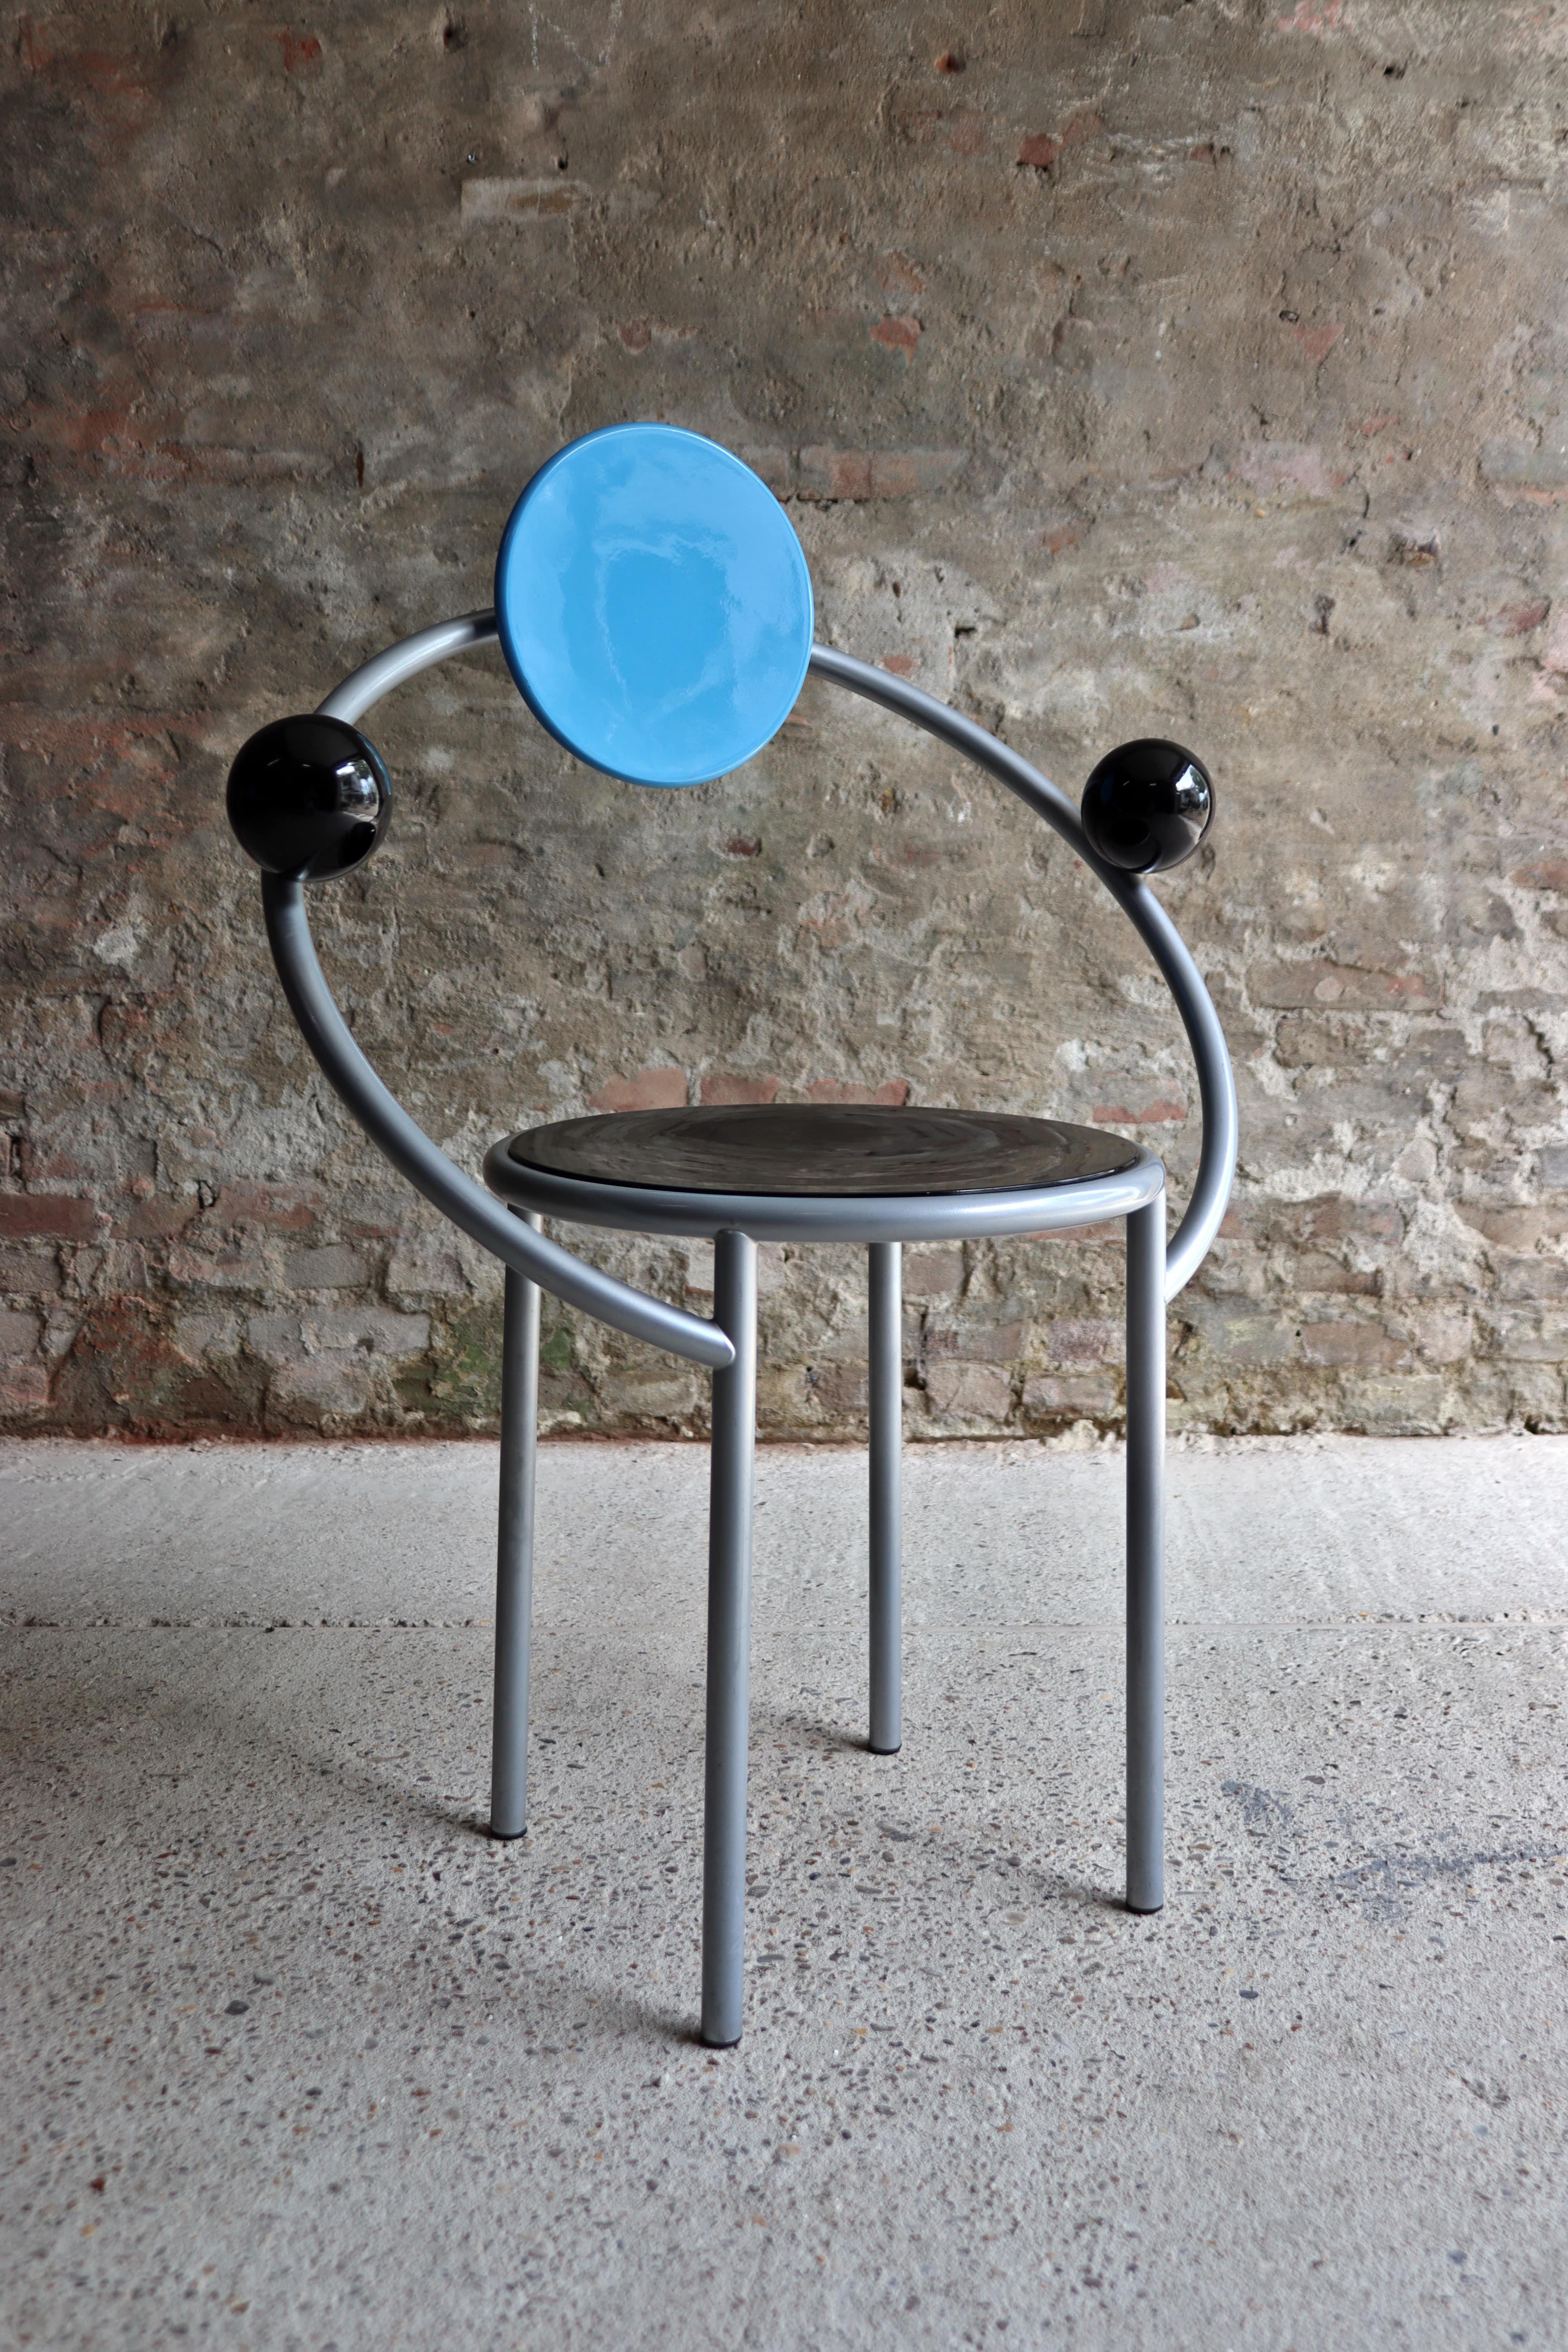 Striking and bold, this chair designed by Michele De Lucchi in 1983 for Memphis will be a superb addition to a contemporary dining room, study, or entryway when used as a unique accent piece. The sophisticated design evokes planetary orbits in a